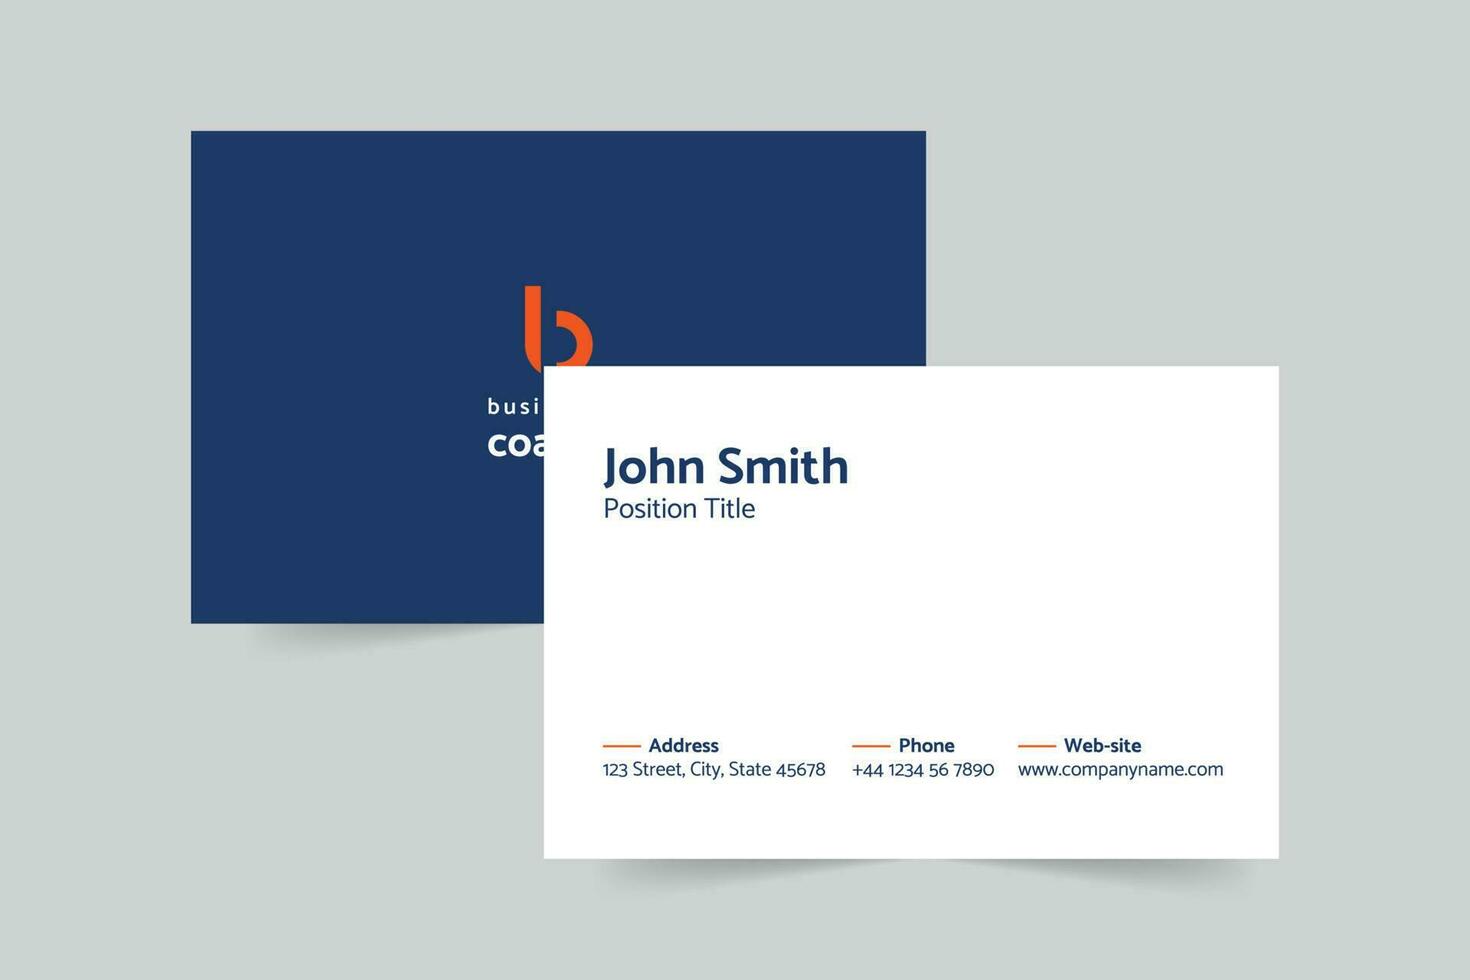 Business Coach business card template. A clean, modern, and high-quality design business card vector design. Editable and customize template business card